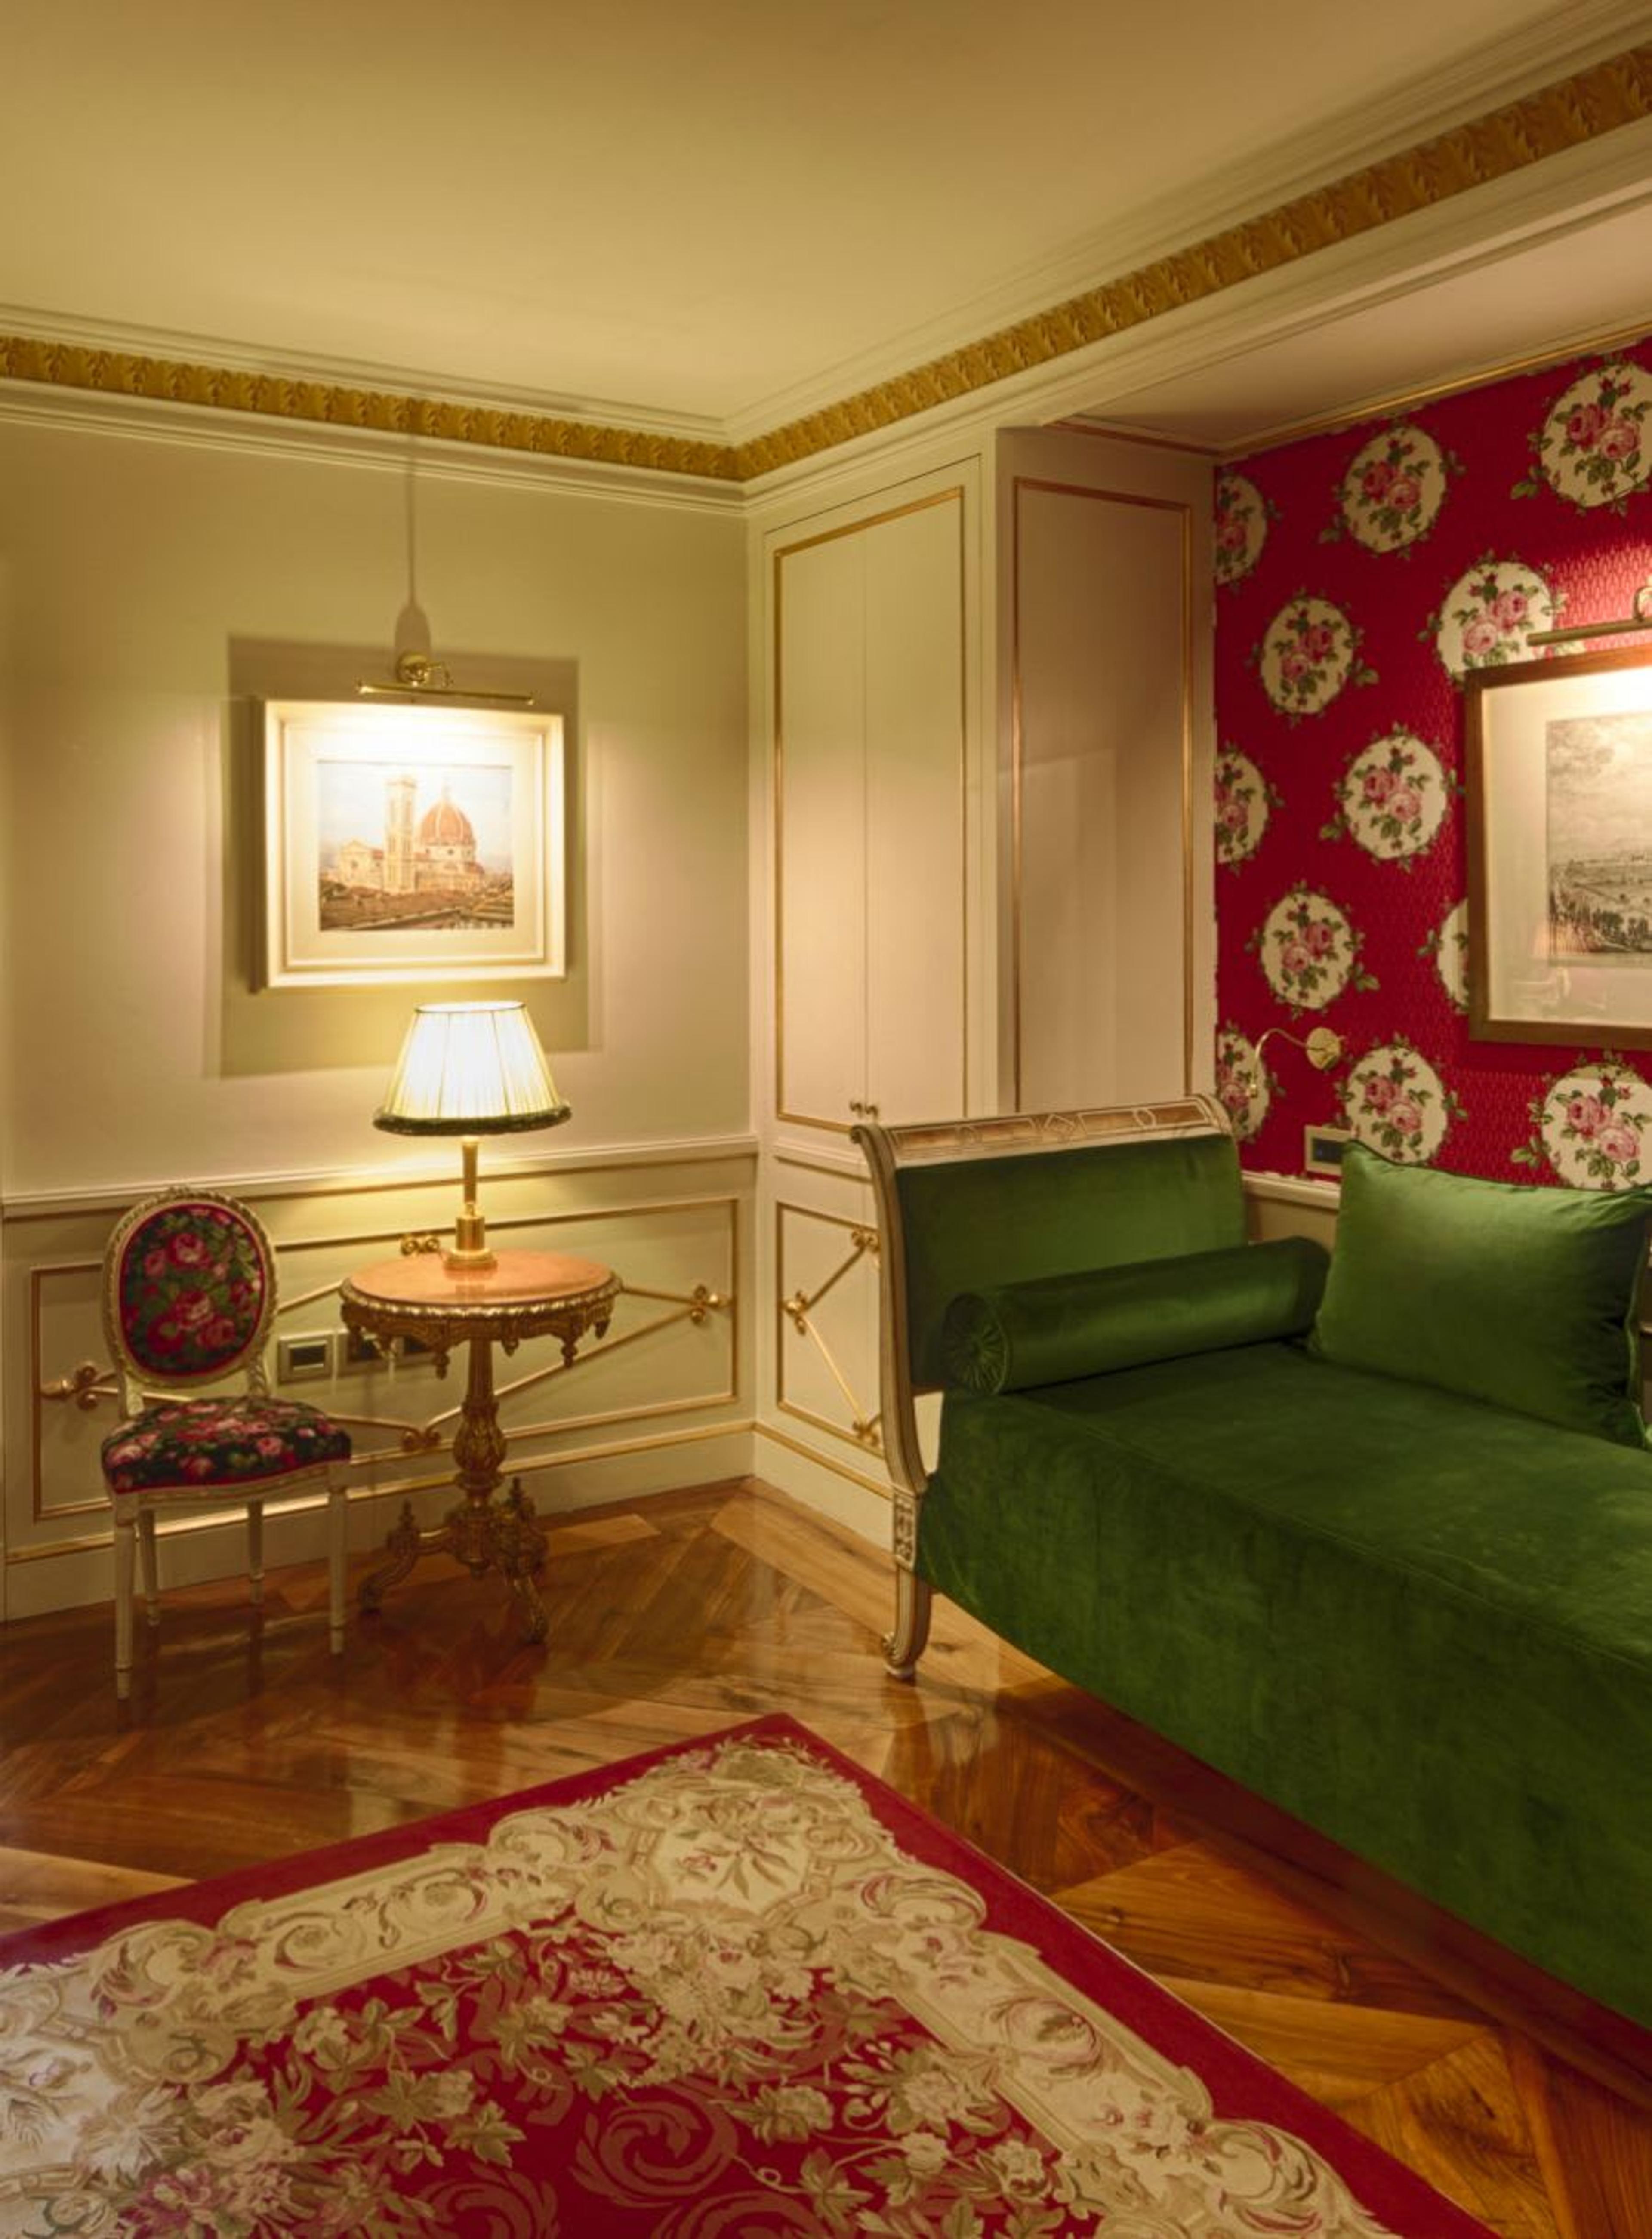 Details of one of Villa Cora's Suites - Elegantly furnished with wooden floors, antique furniture and precious fabrics.